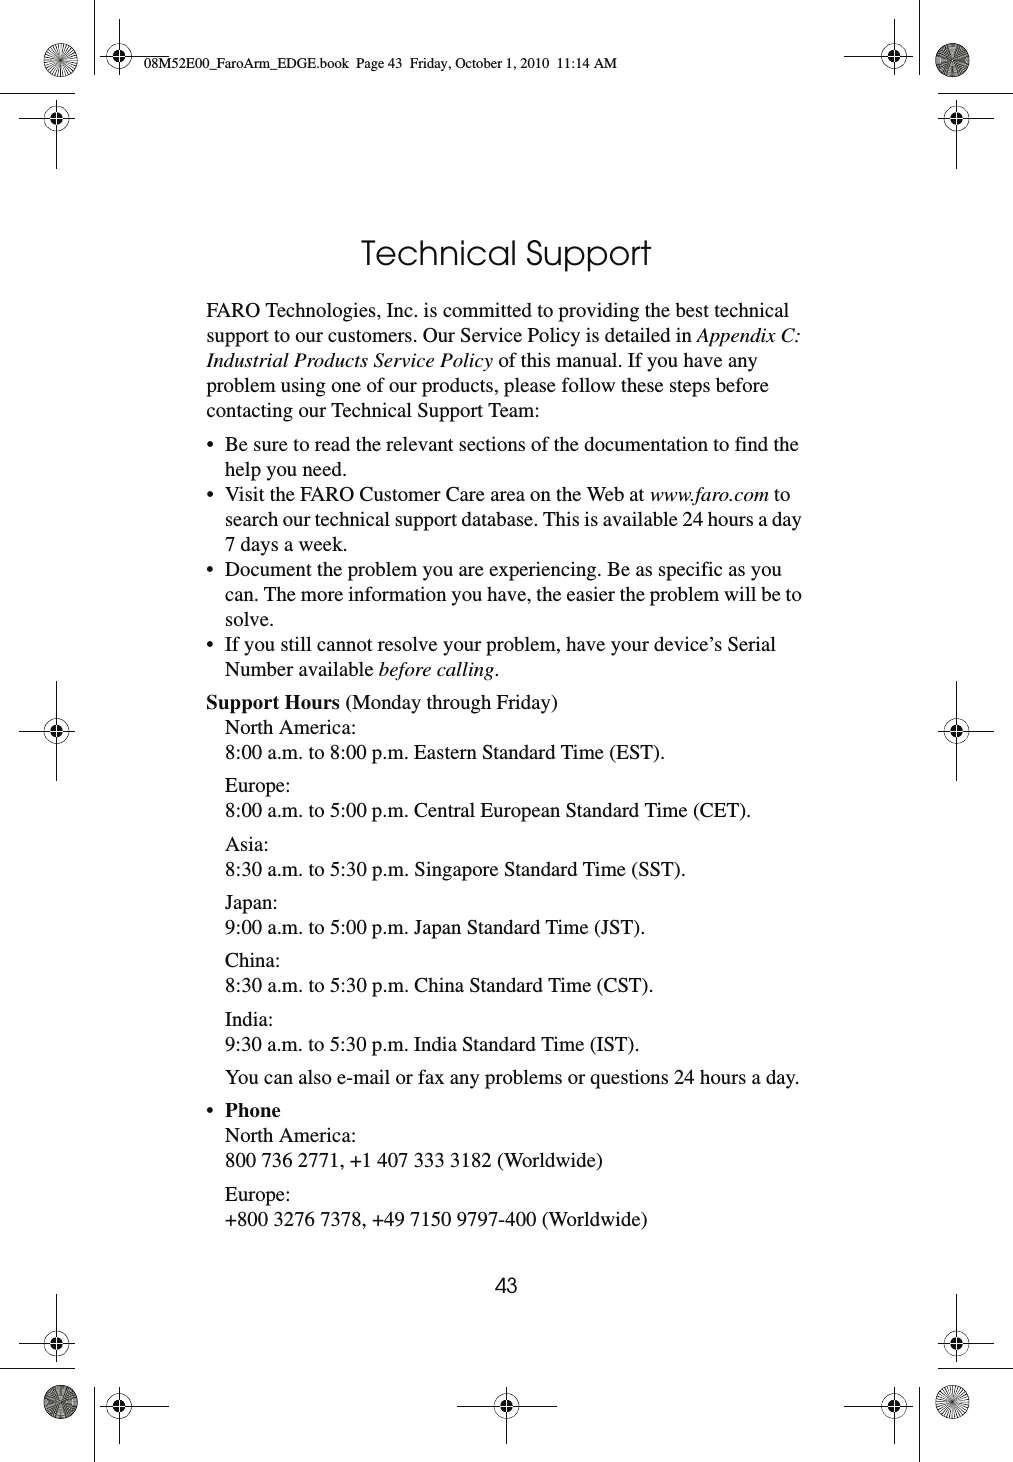 43Technical SupportFARO Technologies, Inc. is committed to providing the best technical support to our customers. Our Service Policy is detailed in Appendix C: Industrial Products Service Policy of this manual. If you have any problem using one of our products, please follow these steps before contacting our Technical Support Team:• Be sure to read the relevant sections of the documentation to find the help you need.• Visit the FARO Customer Care area on the Web at www.faro.com to search our technical support database. This is available 24 hours a day 7 days a week. • Document the problem you are experiencing. Be as specific as you can. The more information you have, the easier the problem will be to solve. • If you still cannot resolve your problem, have your device’s Serial Number available before calling.Support Hours (Monday through Friday) North America:8:00 a.m. to 8:00 p.m. Eastern Standard Time (EST). Europe:8:00 a.m. to 5:00 p.m. Central European Standard Time (CET). Asia:8:30 a.m. to 5:30 p.m. Singapore Standard Time (SST). Japan:9:00 a.m. to 5:00 p.m. Japan Standard Time (JST). China:8:30 a.m. to 5:30 p.m. China Standard Time (CST). India:9:30 a.m. to 5:30 p.m. India Standard Time (IST). You can also e-mail or fax any problems or questions 24 hours a day.•Phone North America:800 736 2771, +1 407 333 3182 (Worldwide)Europe:+800 3276 7378, +49 7150 9797-400 (Worldwide)08M52E00_FaroArm_EDGE.book  Page 43  Friday, October 1, 2010  11:14 AM